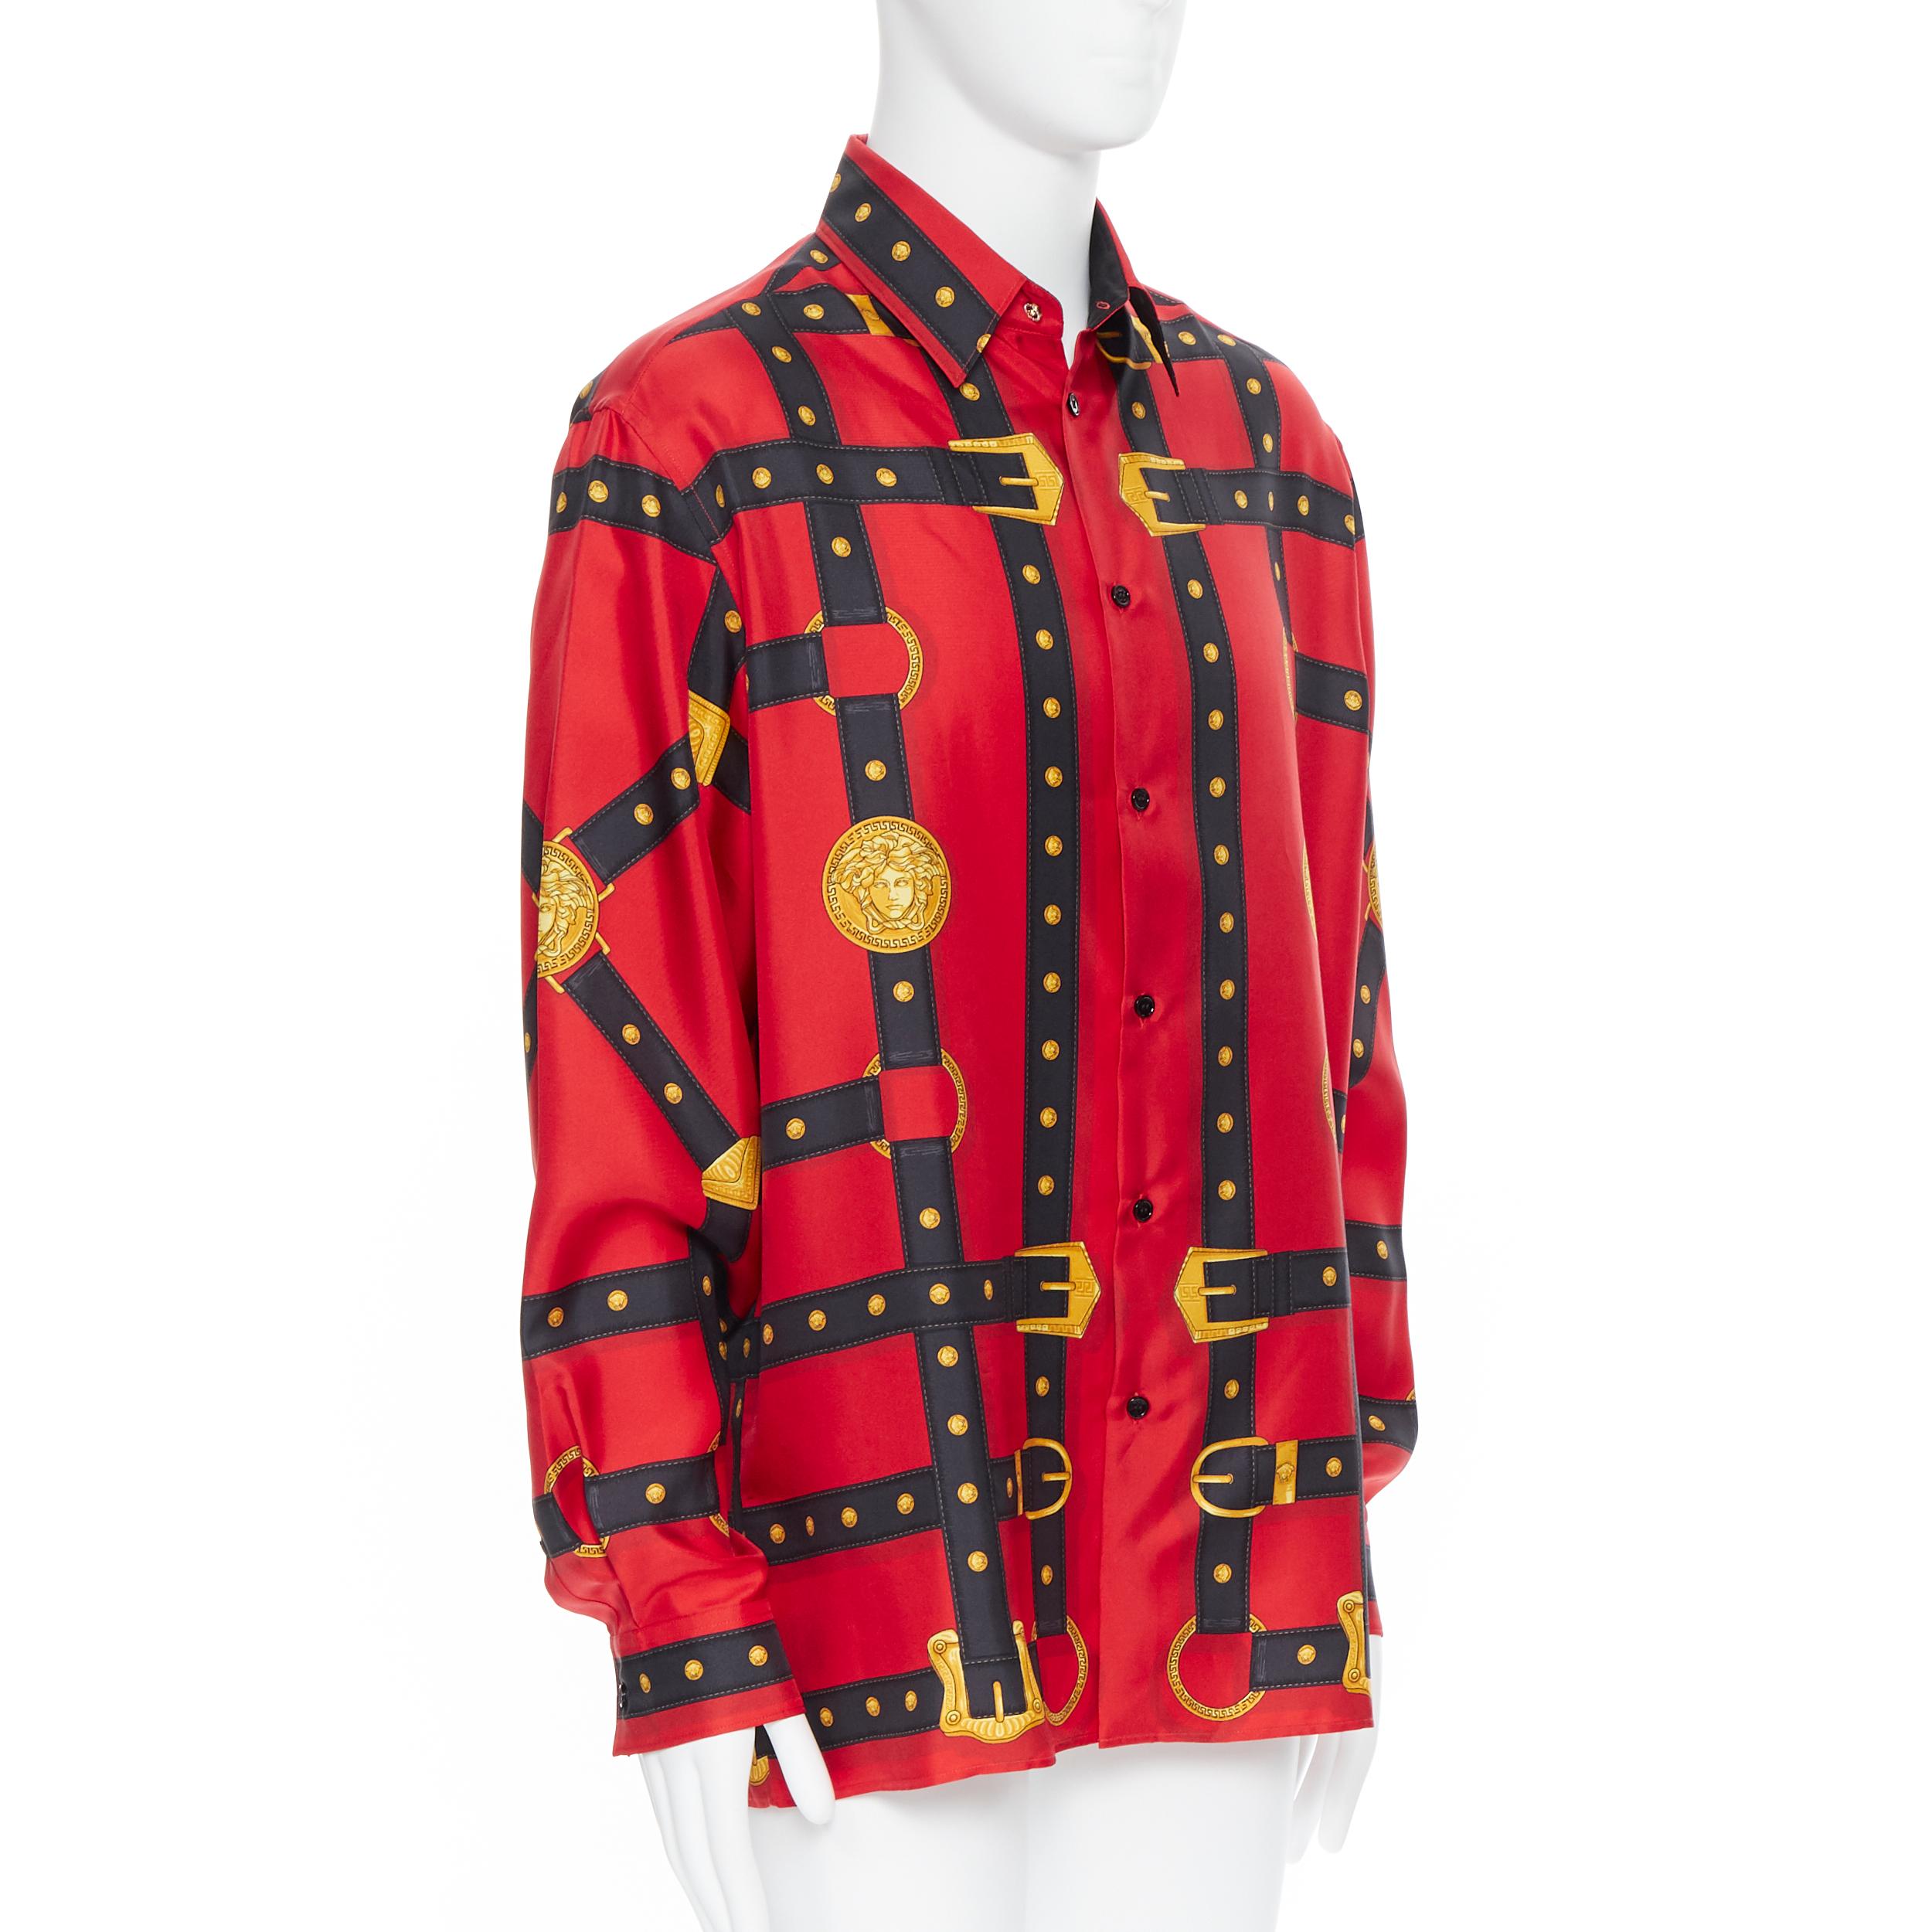 versace shirt red and gold